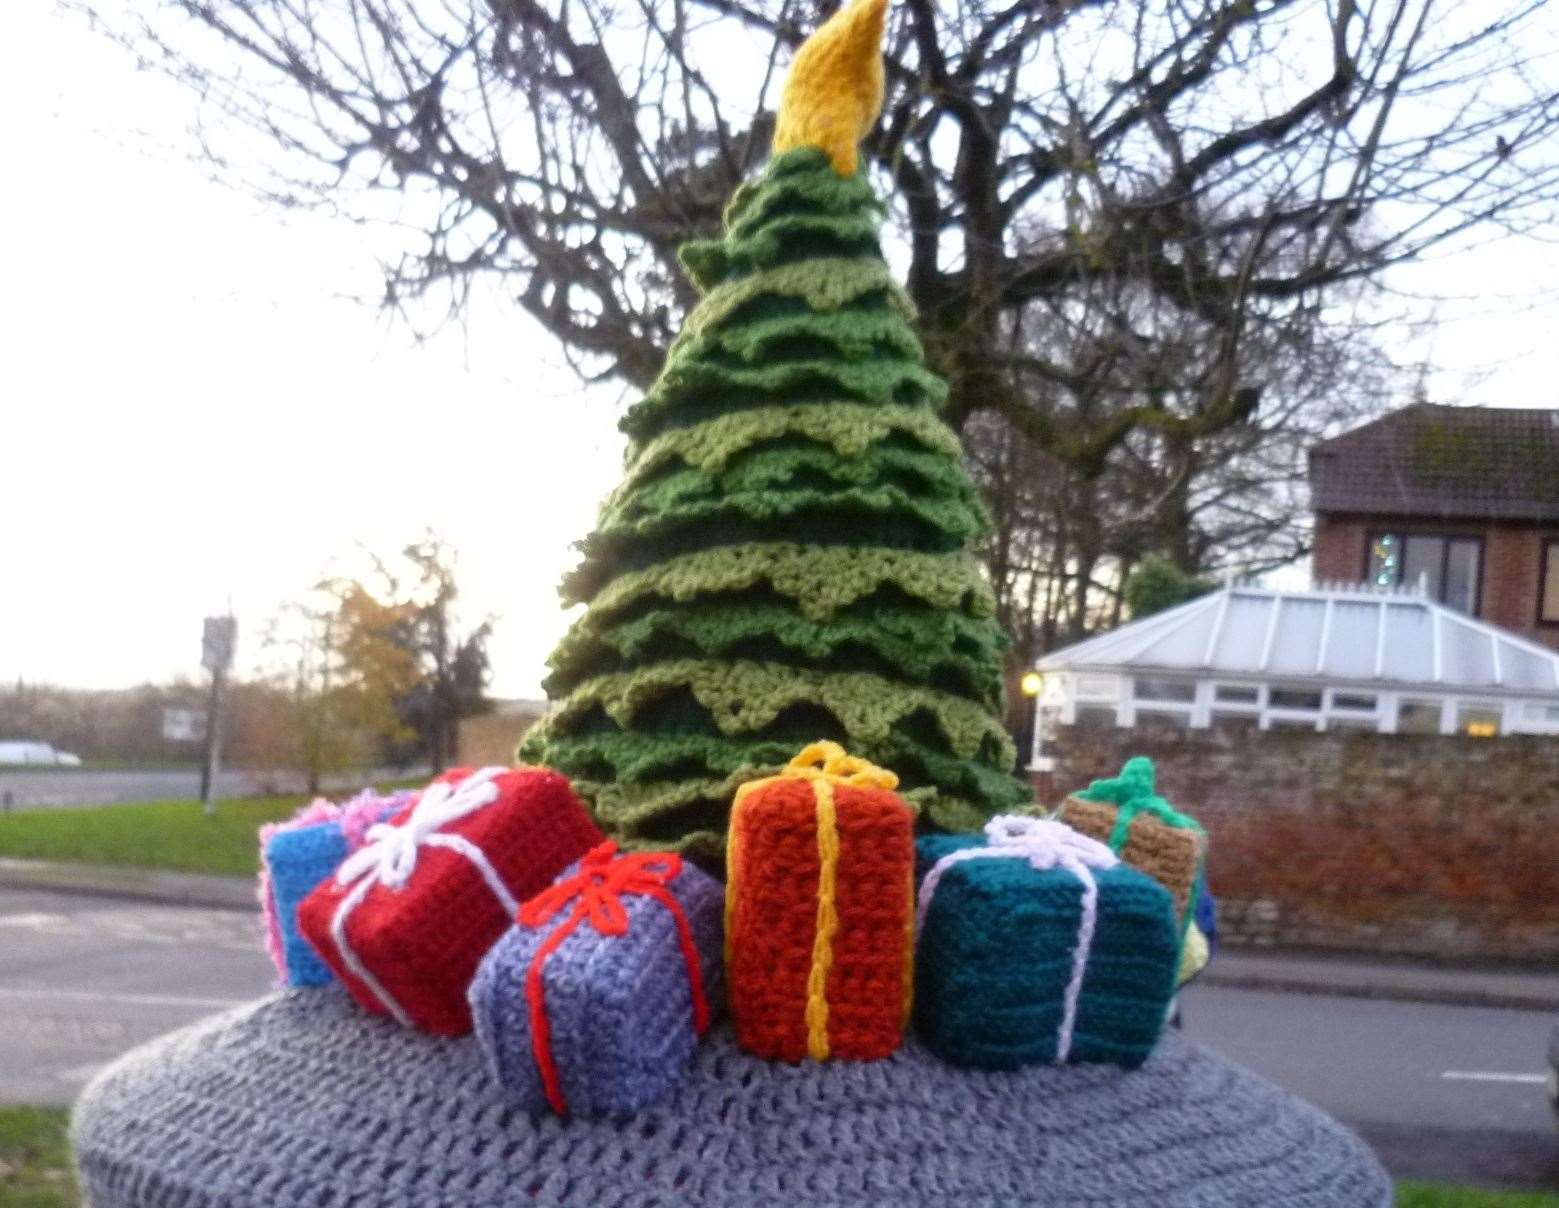 This woolly tree can be found outside Barming post office